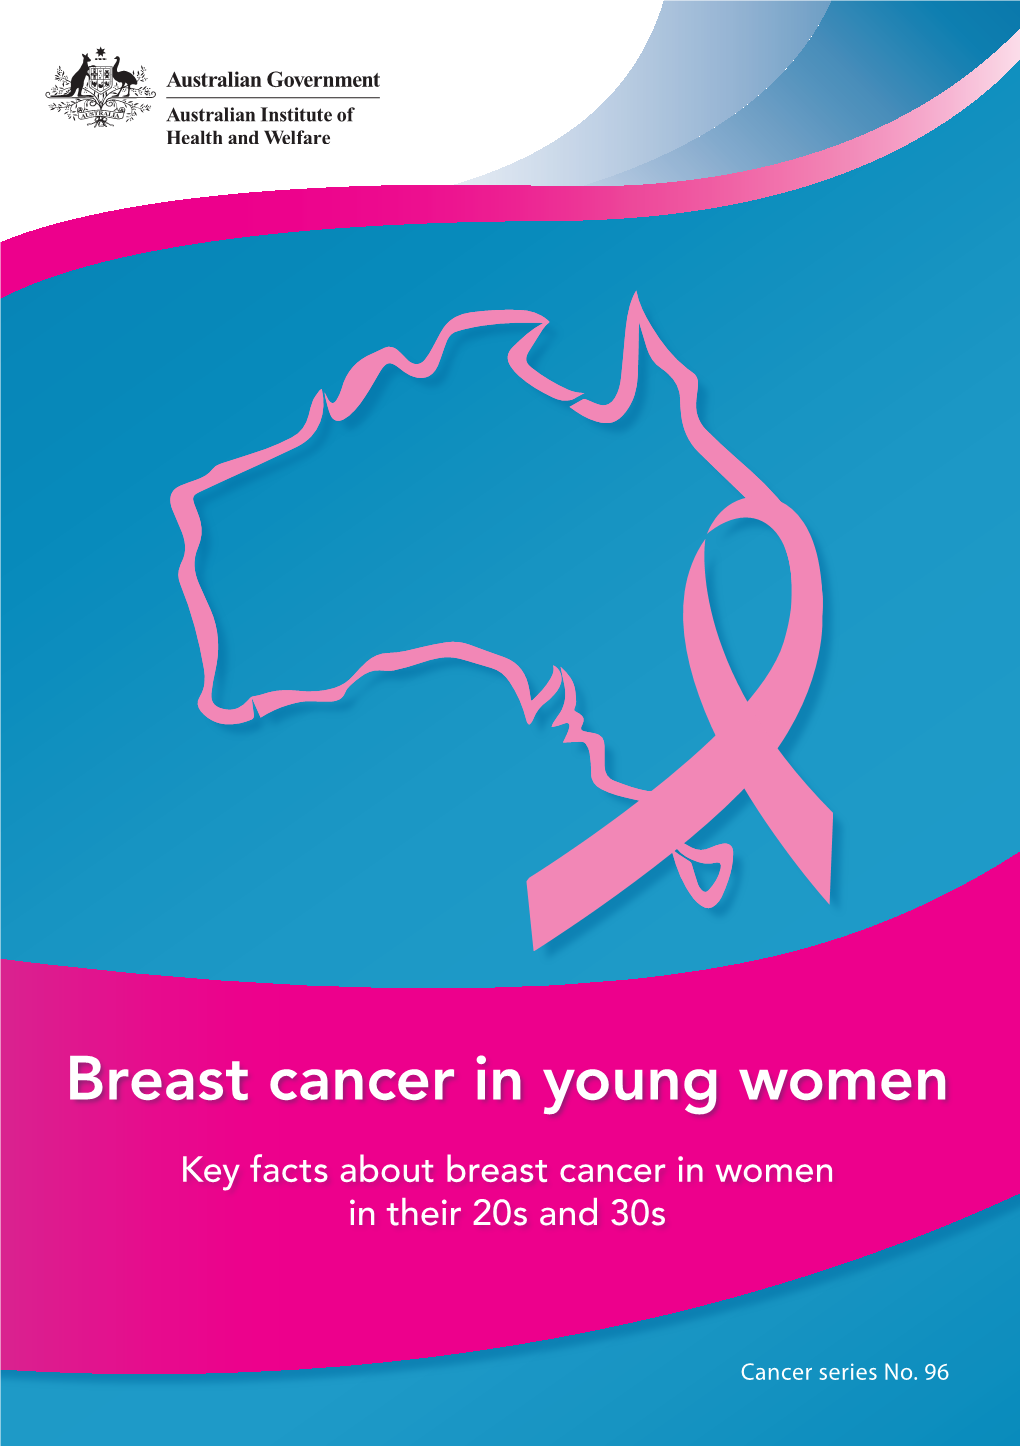 Breast Cancer in Young Women Is the First National Report Presenting Key Data Specific to Breast Cancer in Women in Their 20S and 30S